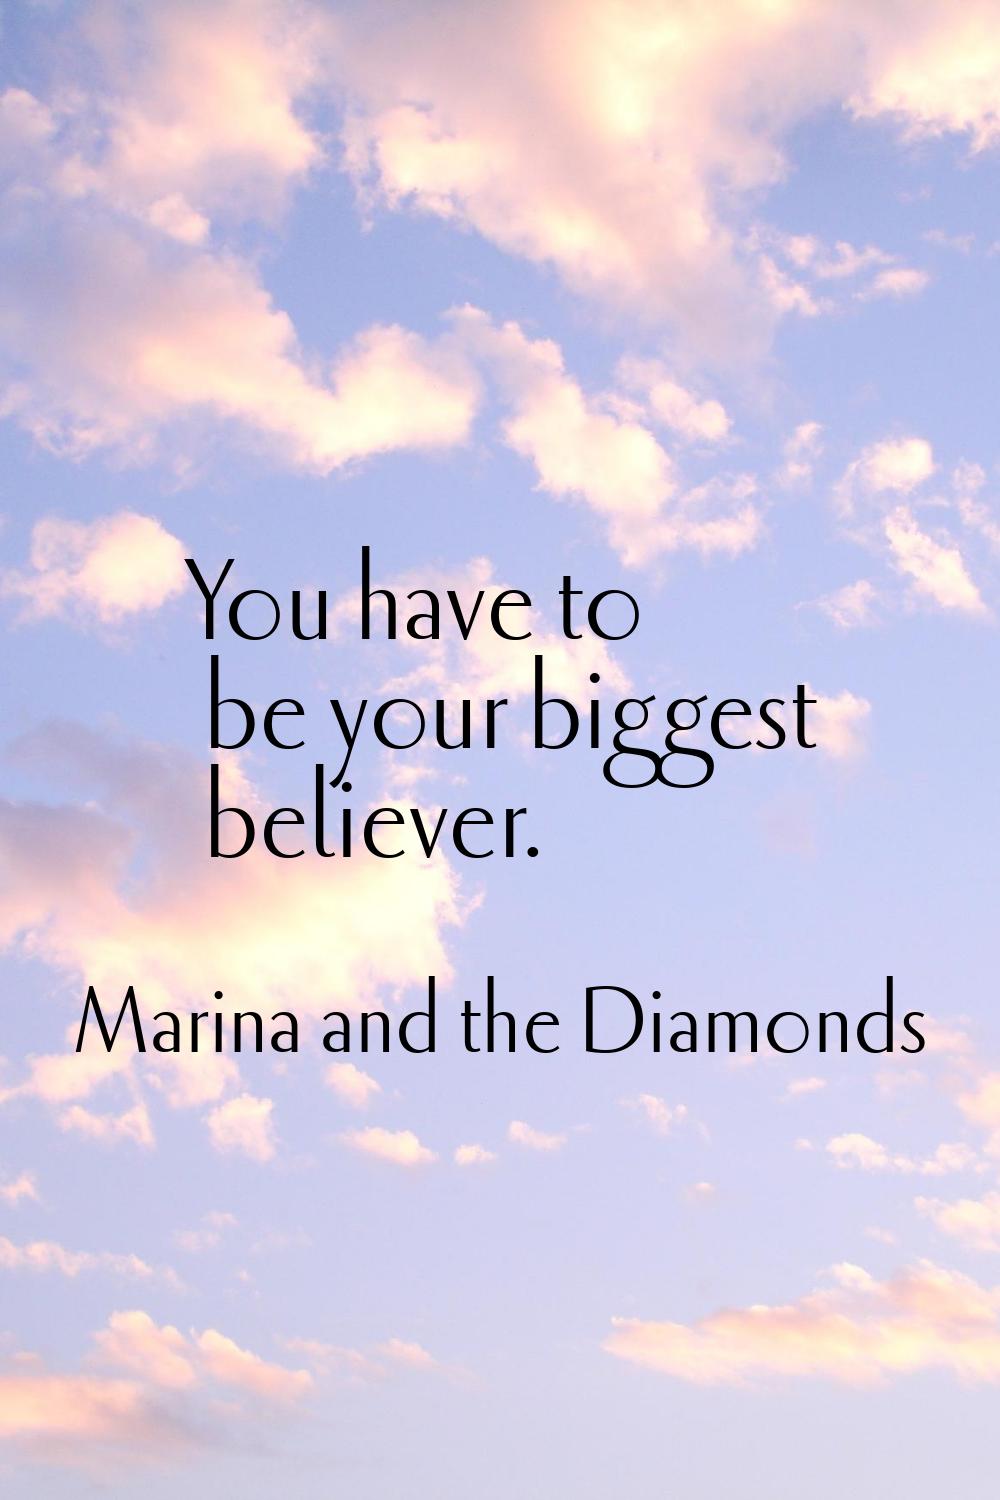 You have to be your biggest believer.